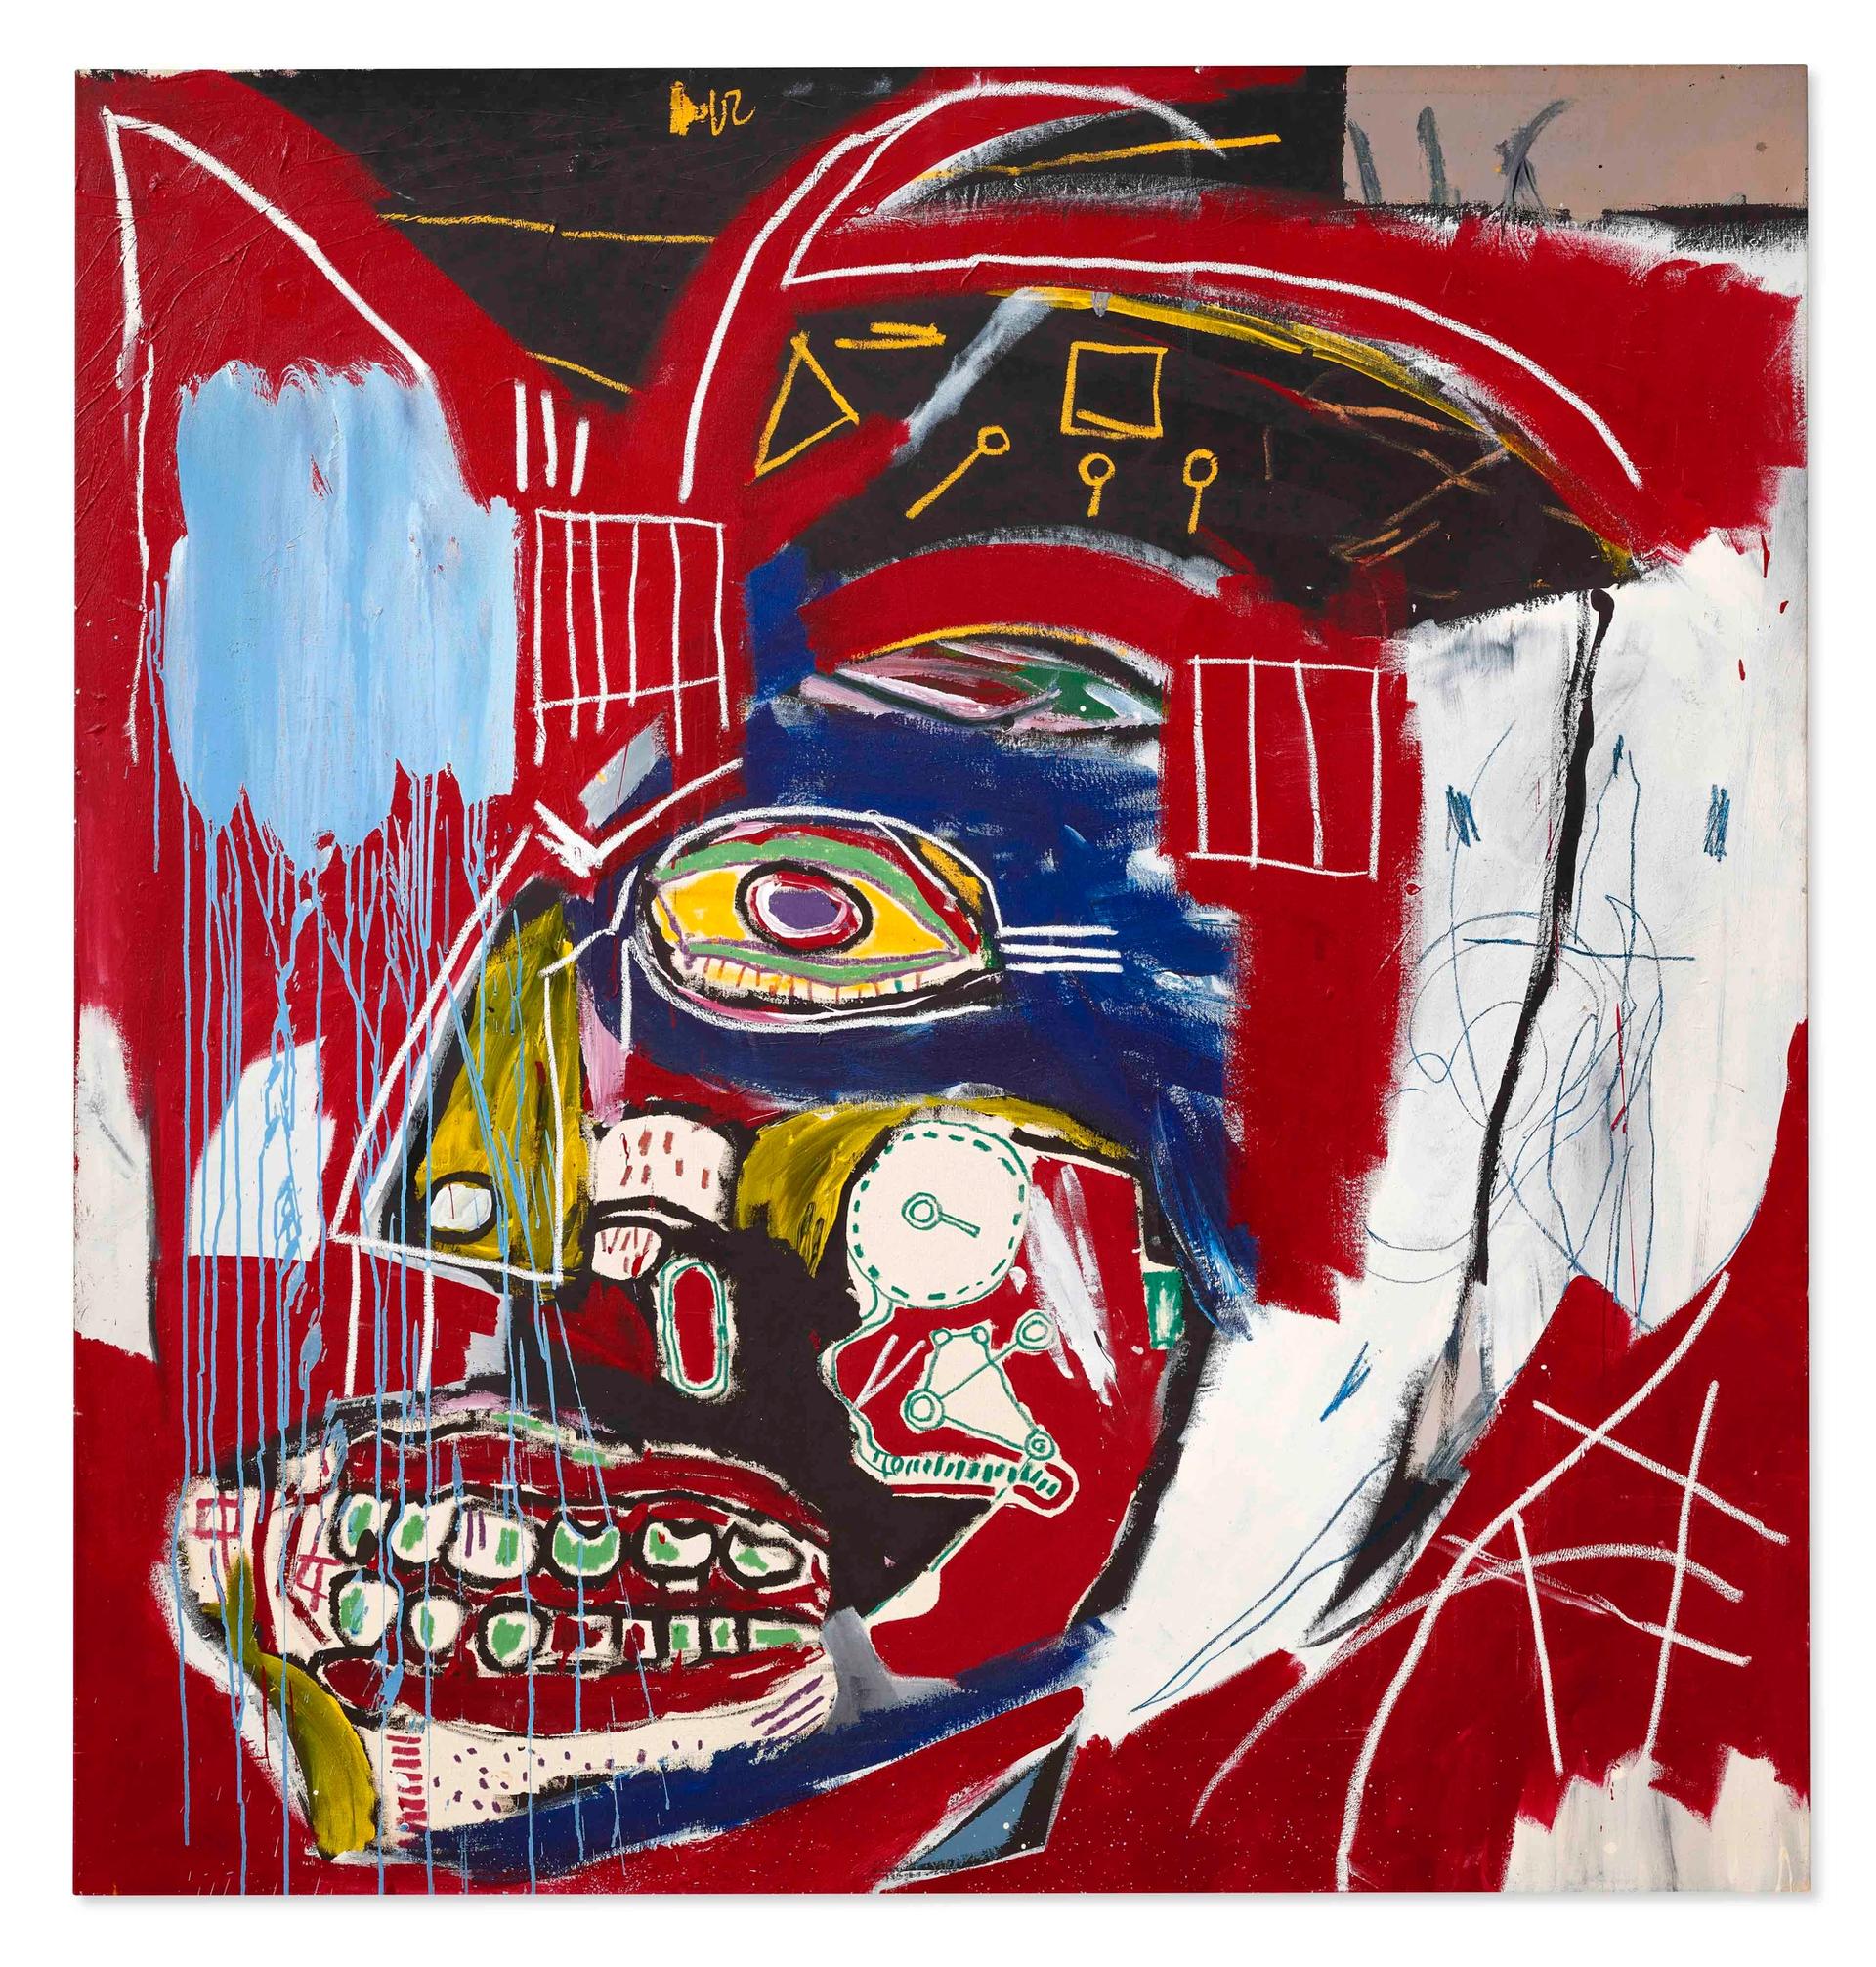 Jean-Michel Basquiat's In This Case, sold for $93.1m Courtesy of Christie's